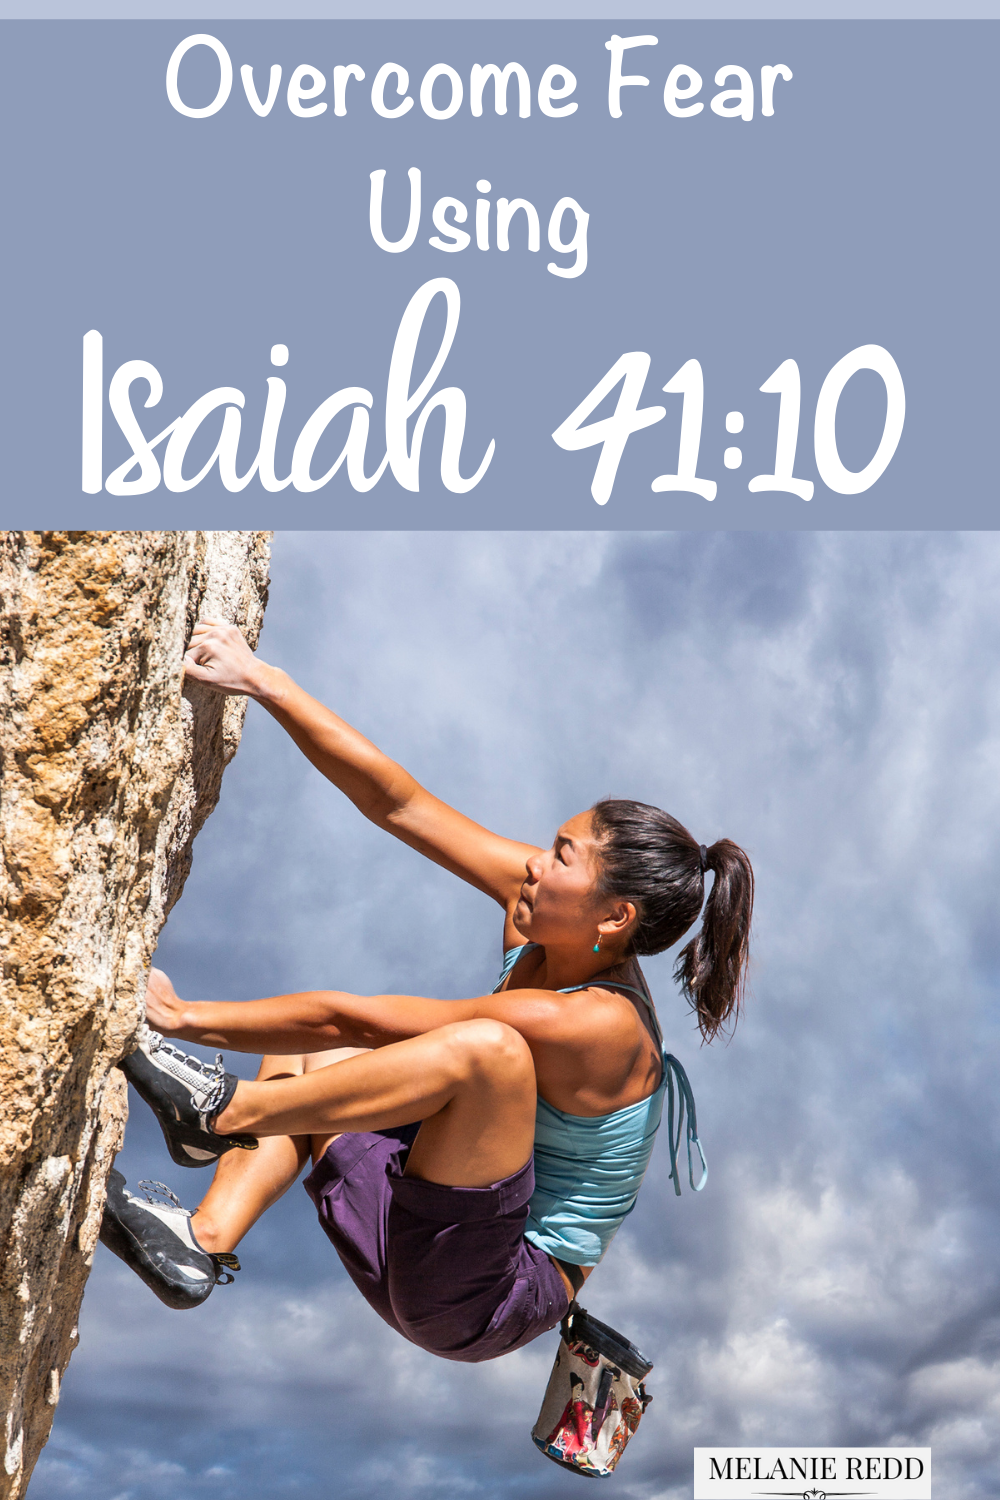 Fear and anxiety are emotions that all of us face. What can we do to win over such things? How can we find the strength to keep going—no matter how we feel? Here is some hope! Learn how to overcome fear using Isaiah 41:10. #fear #overcomefear #isaiah4110 #hopeoverfear #hope